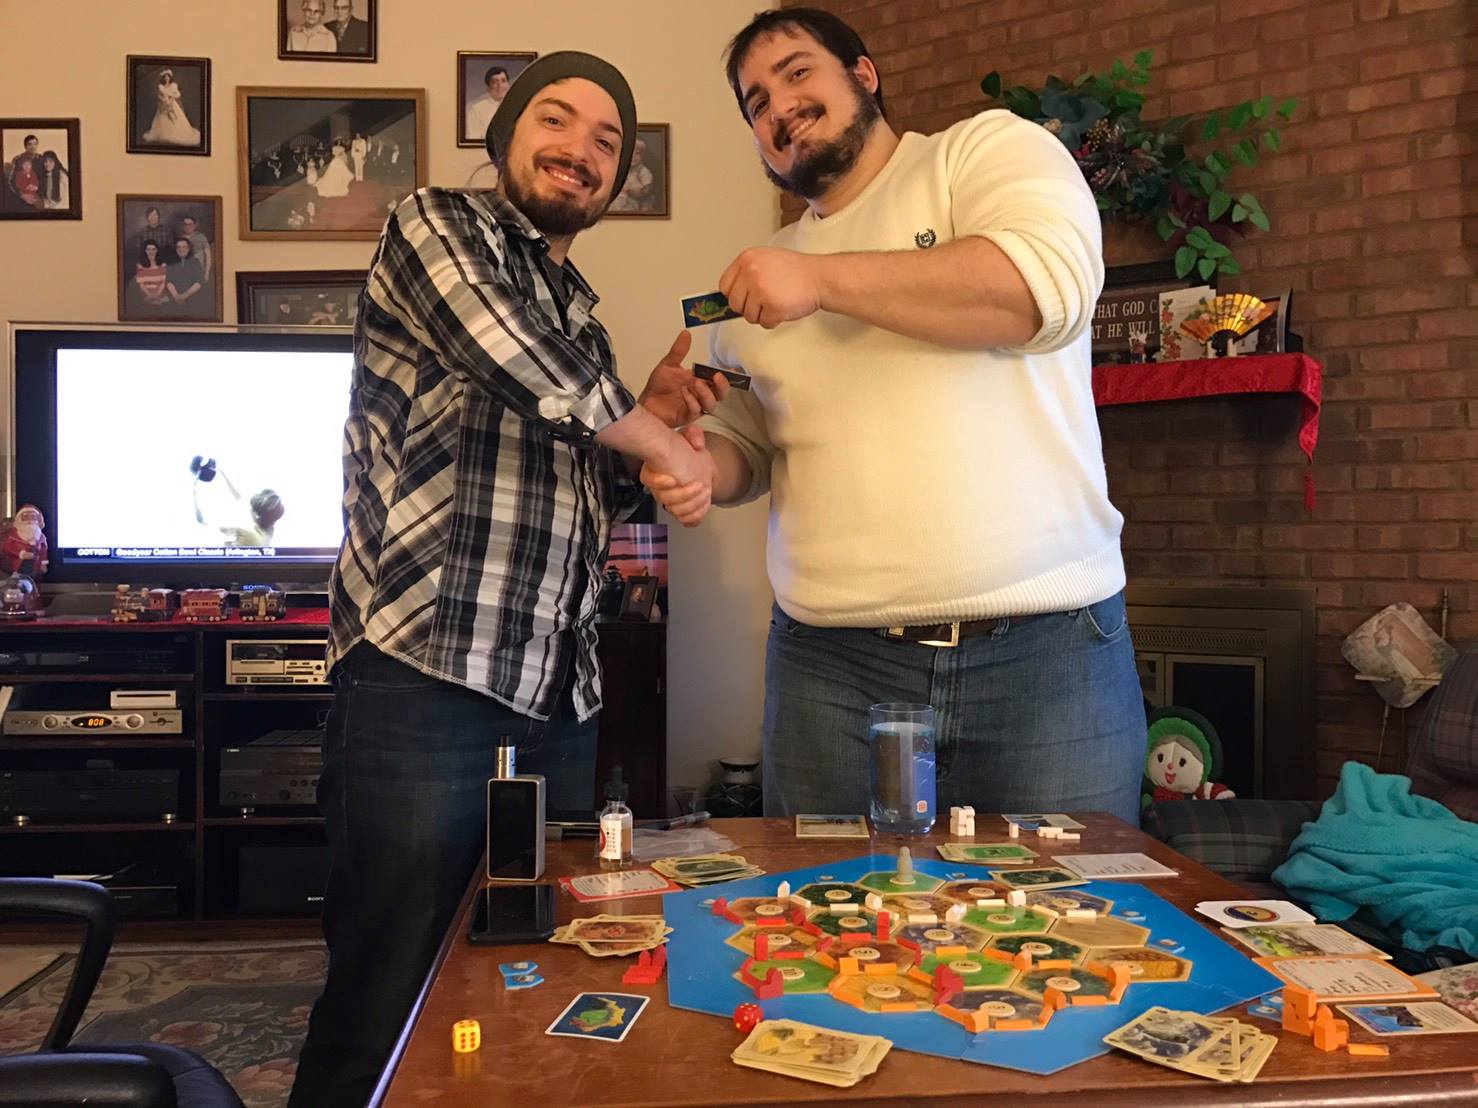 Ethan shaking hands with the victorious Josh, right after they VICIOUSLY betrayed me in Catan by refusing to trade with me! It was Manifest Destiny, I tell you! You would have prospered under my rule! 